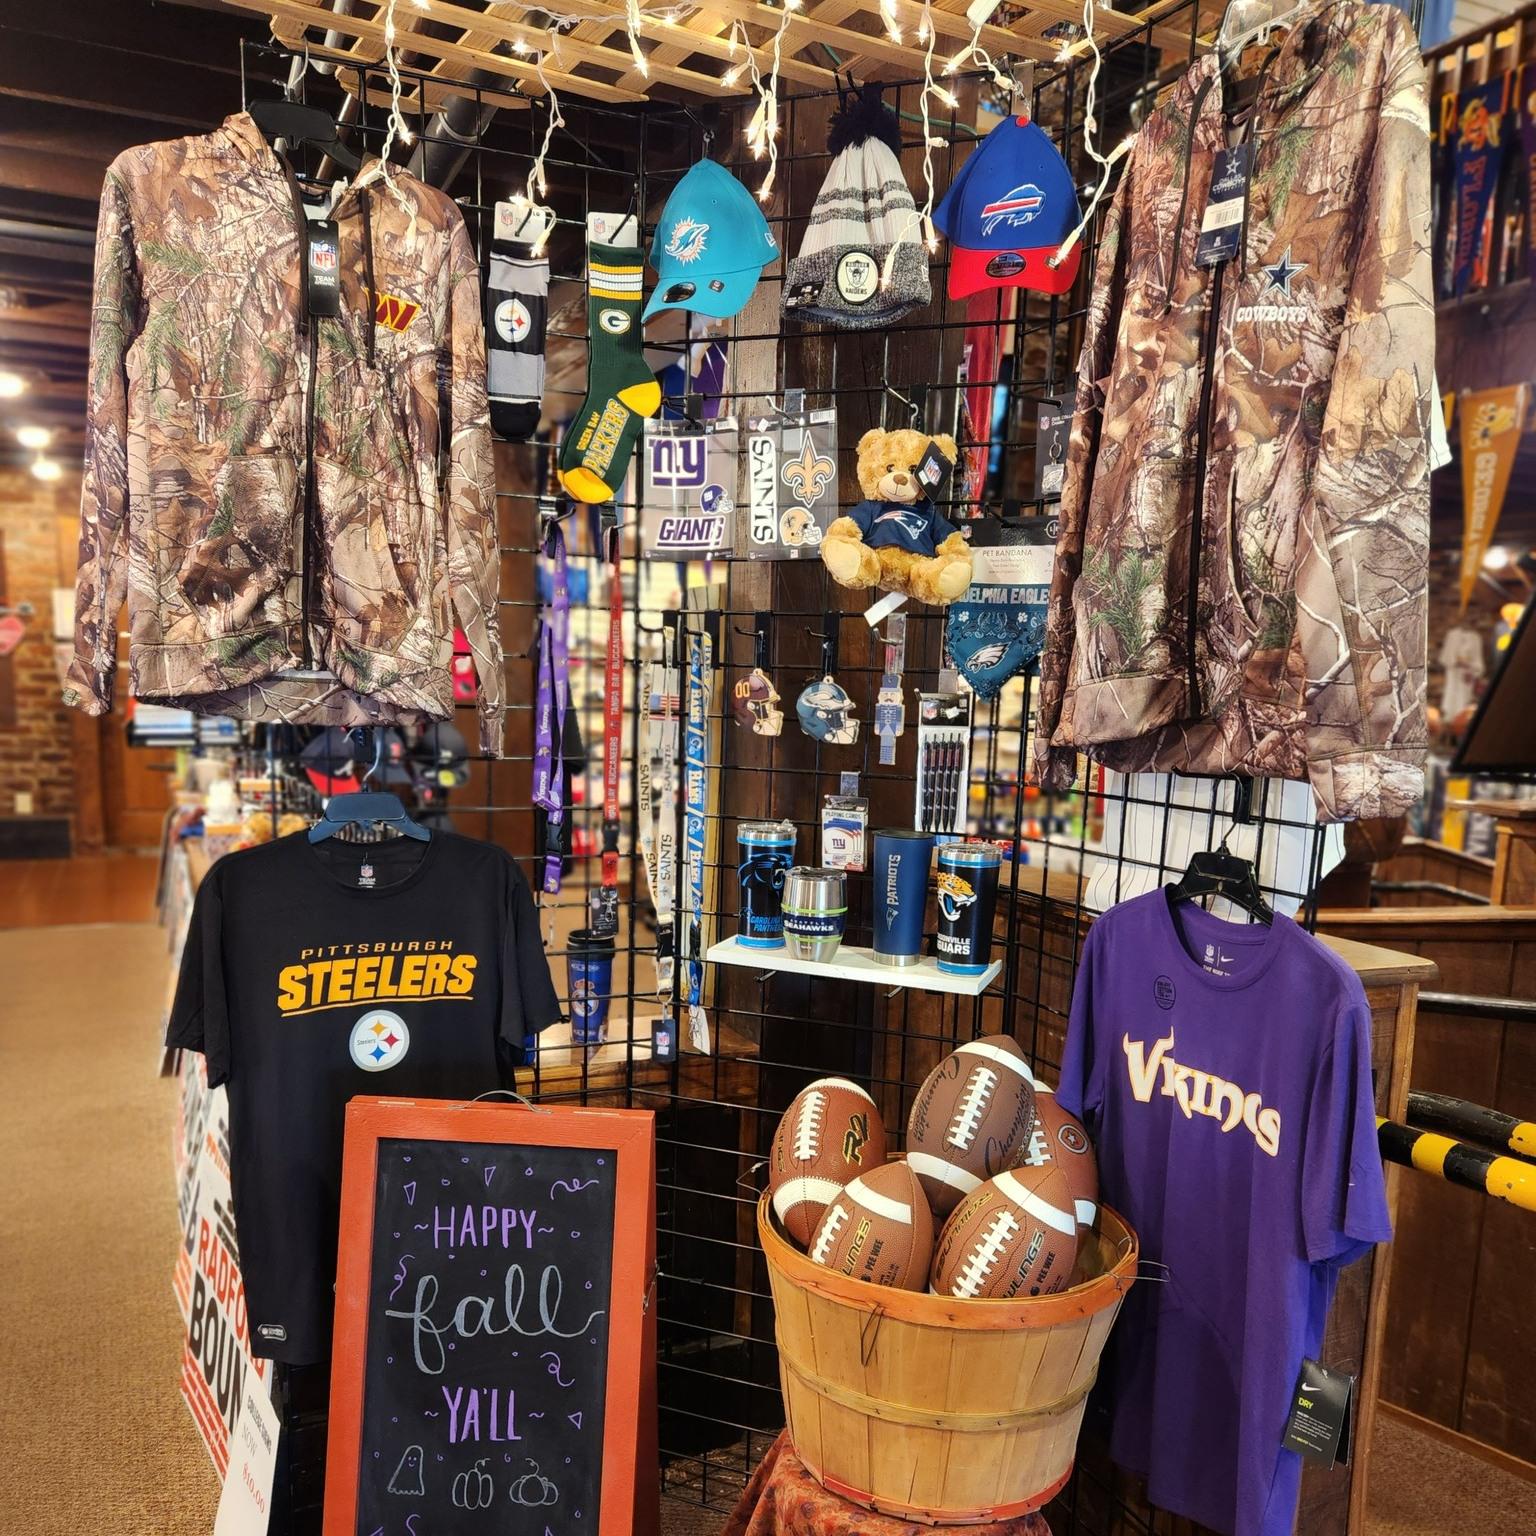 Happy Fall Y'all!
Get all your game day gear at Disco Sports! Disco Sports Richmond (804)285-4242